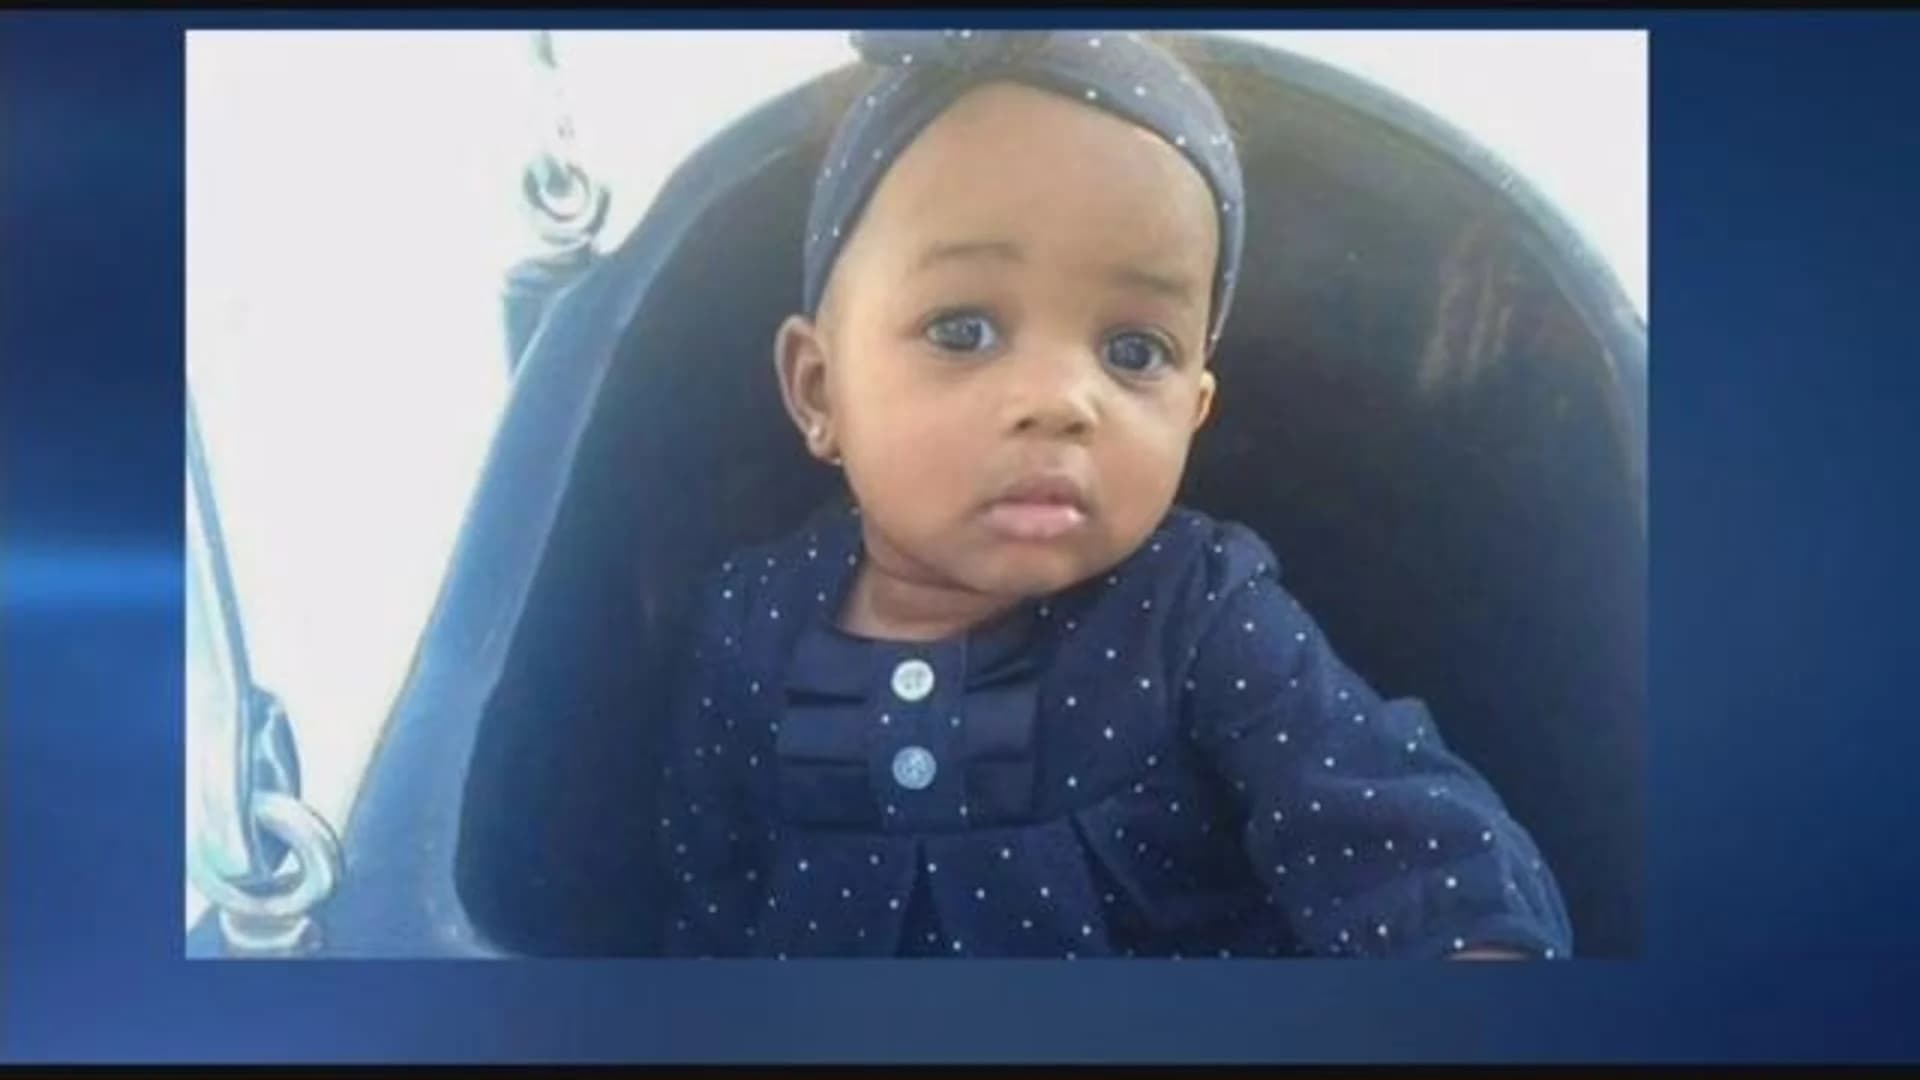 Funeral held for baby beaten to death